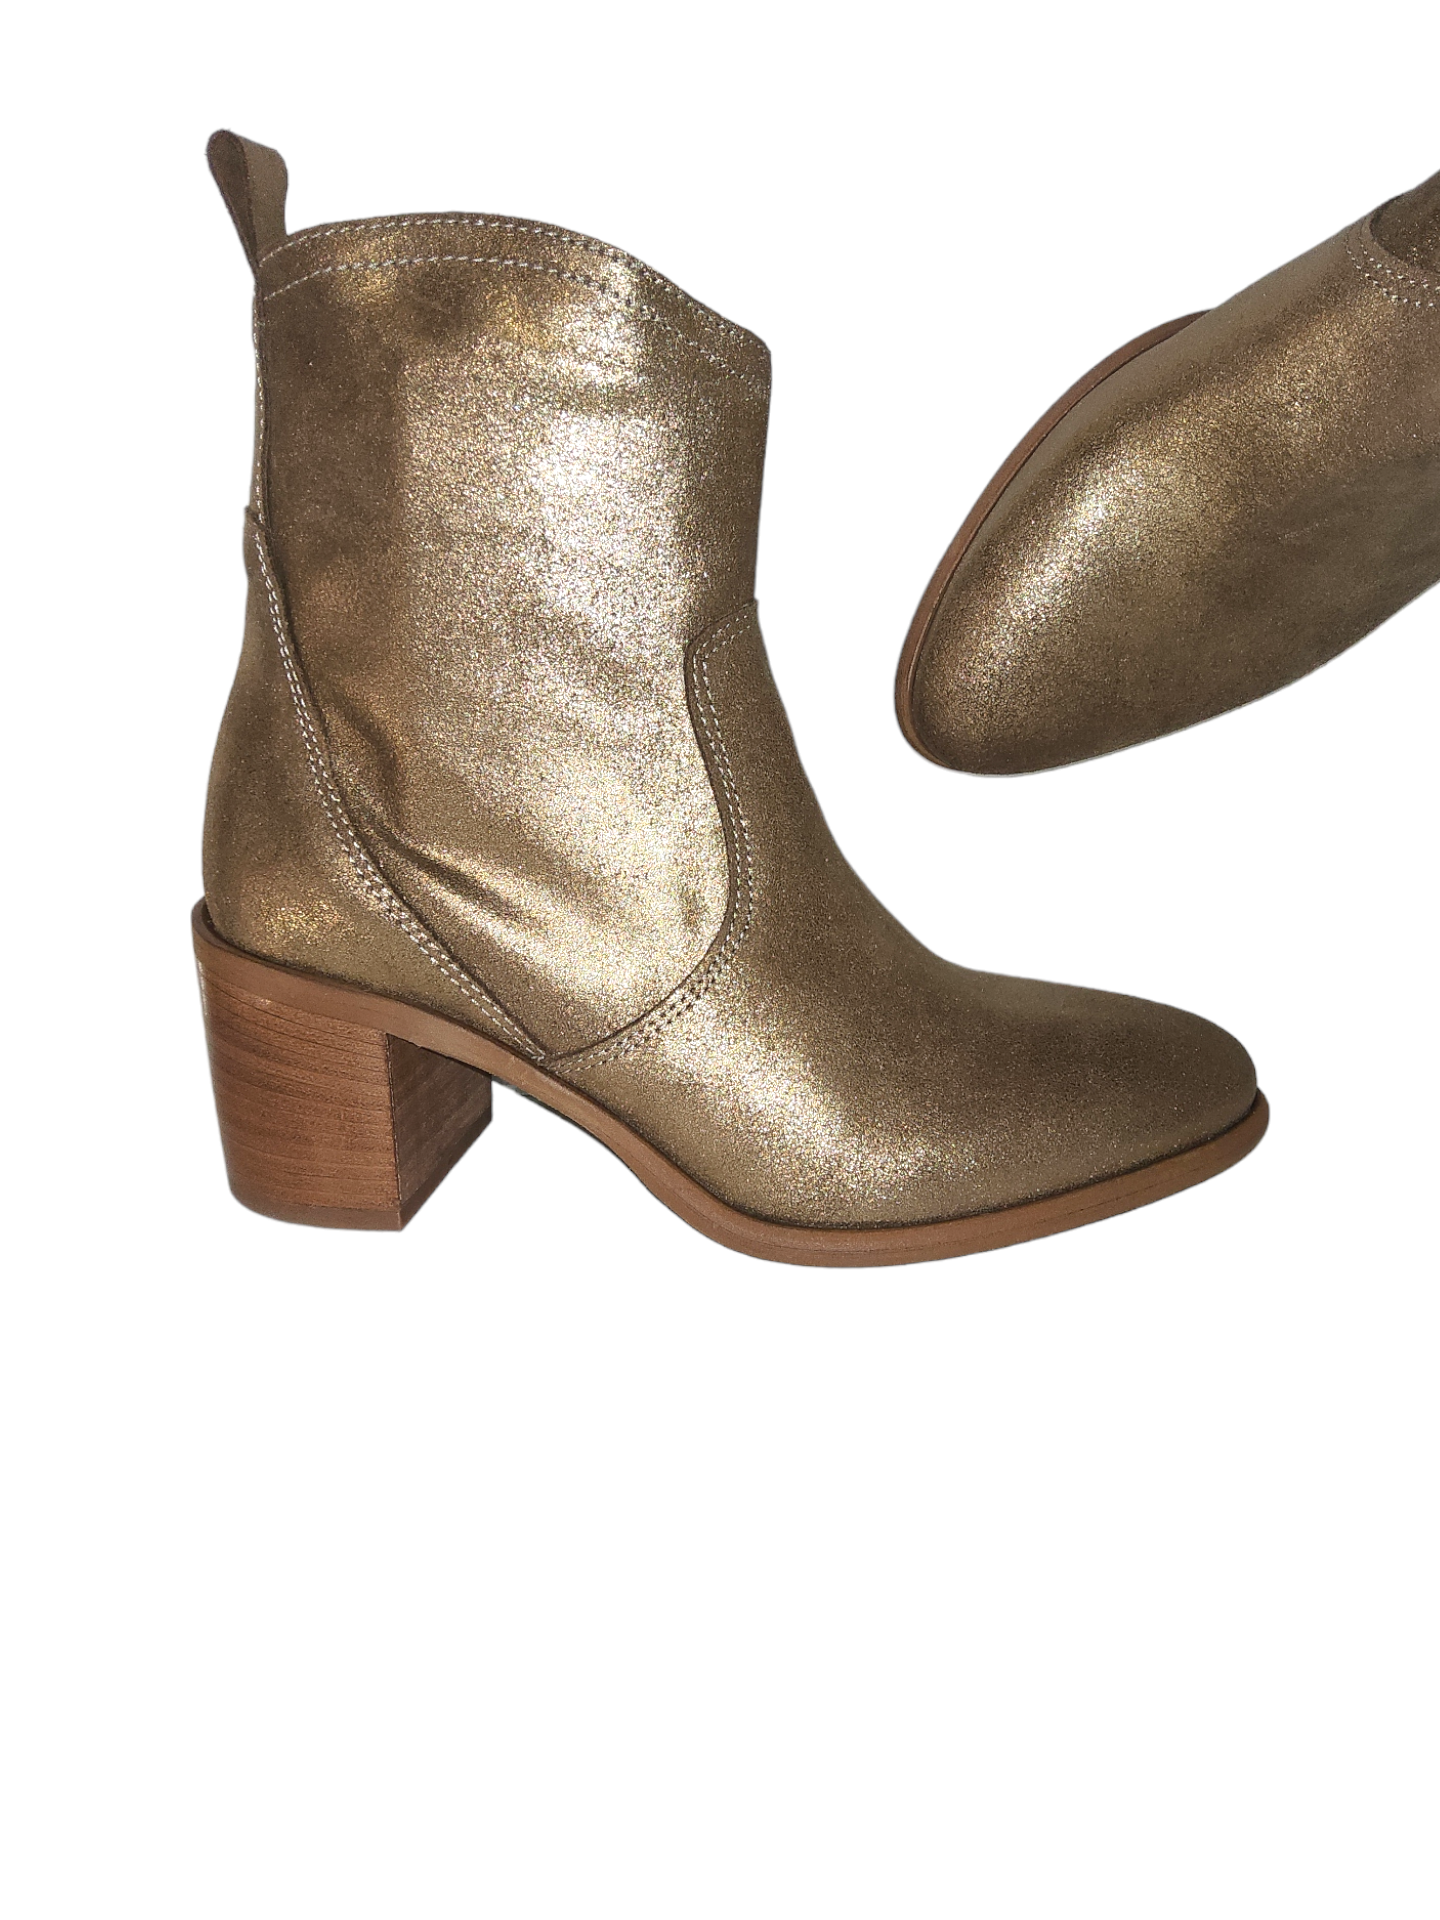 Gold leather boots